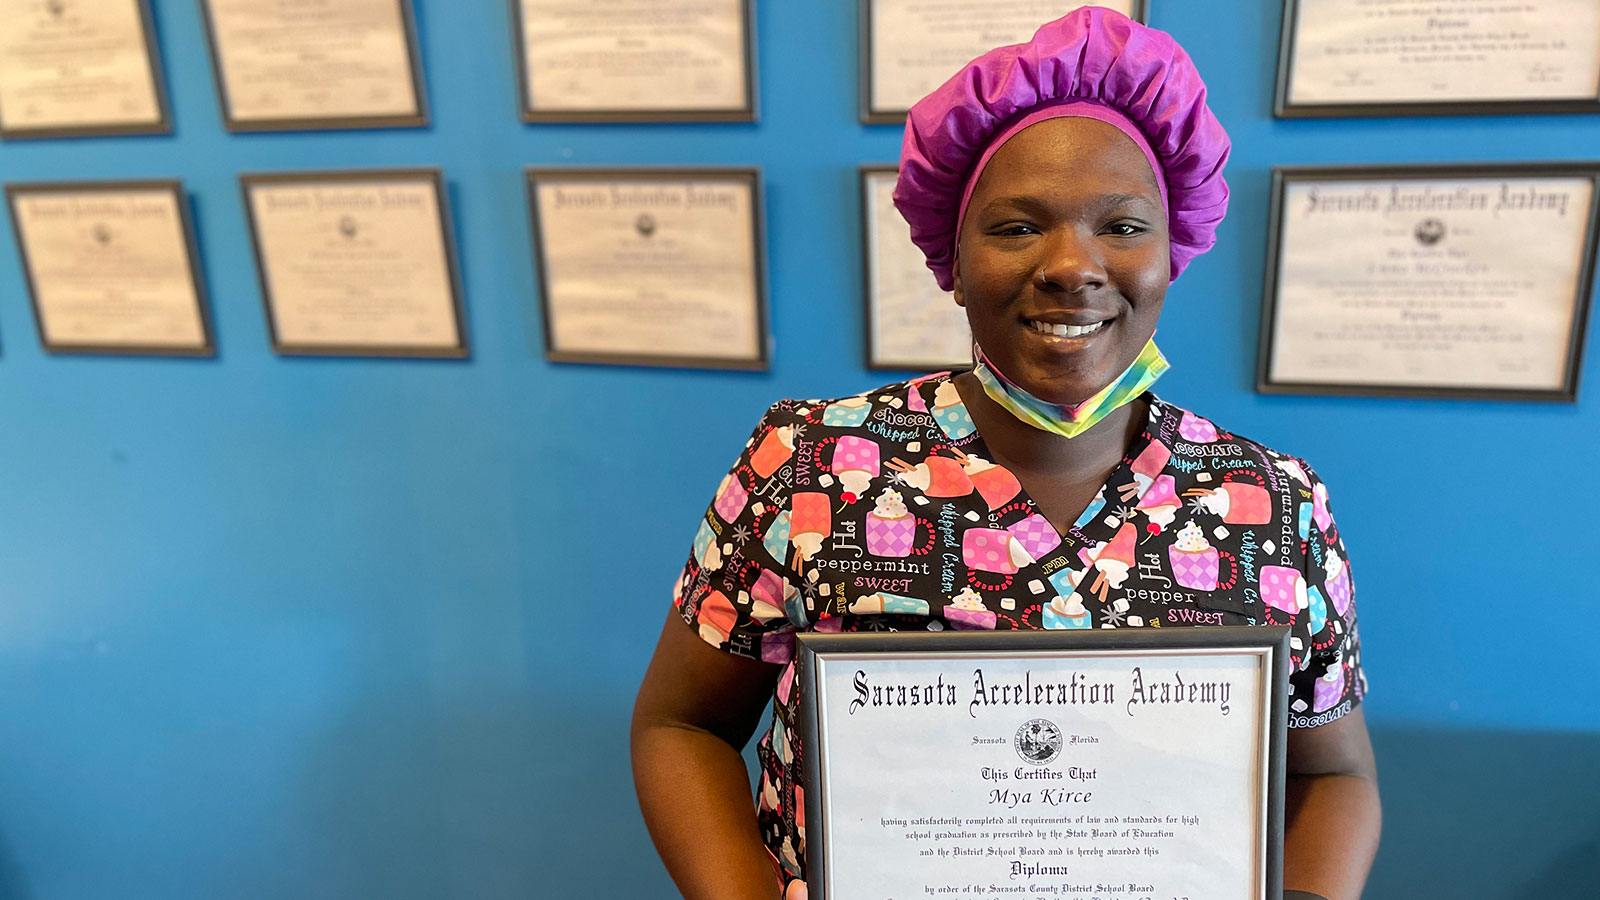 Woman stands smiling and holding a high school diploma